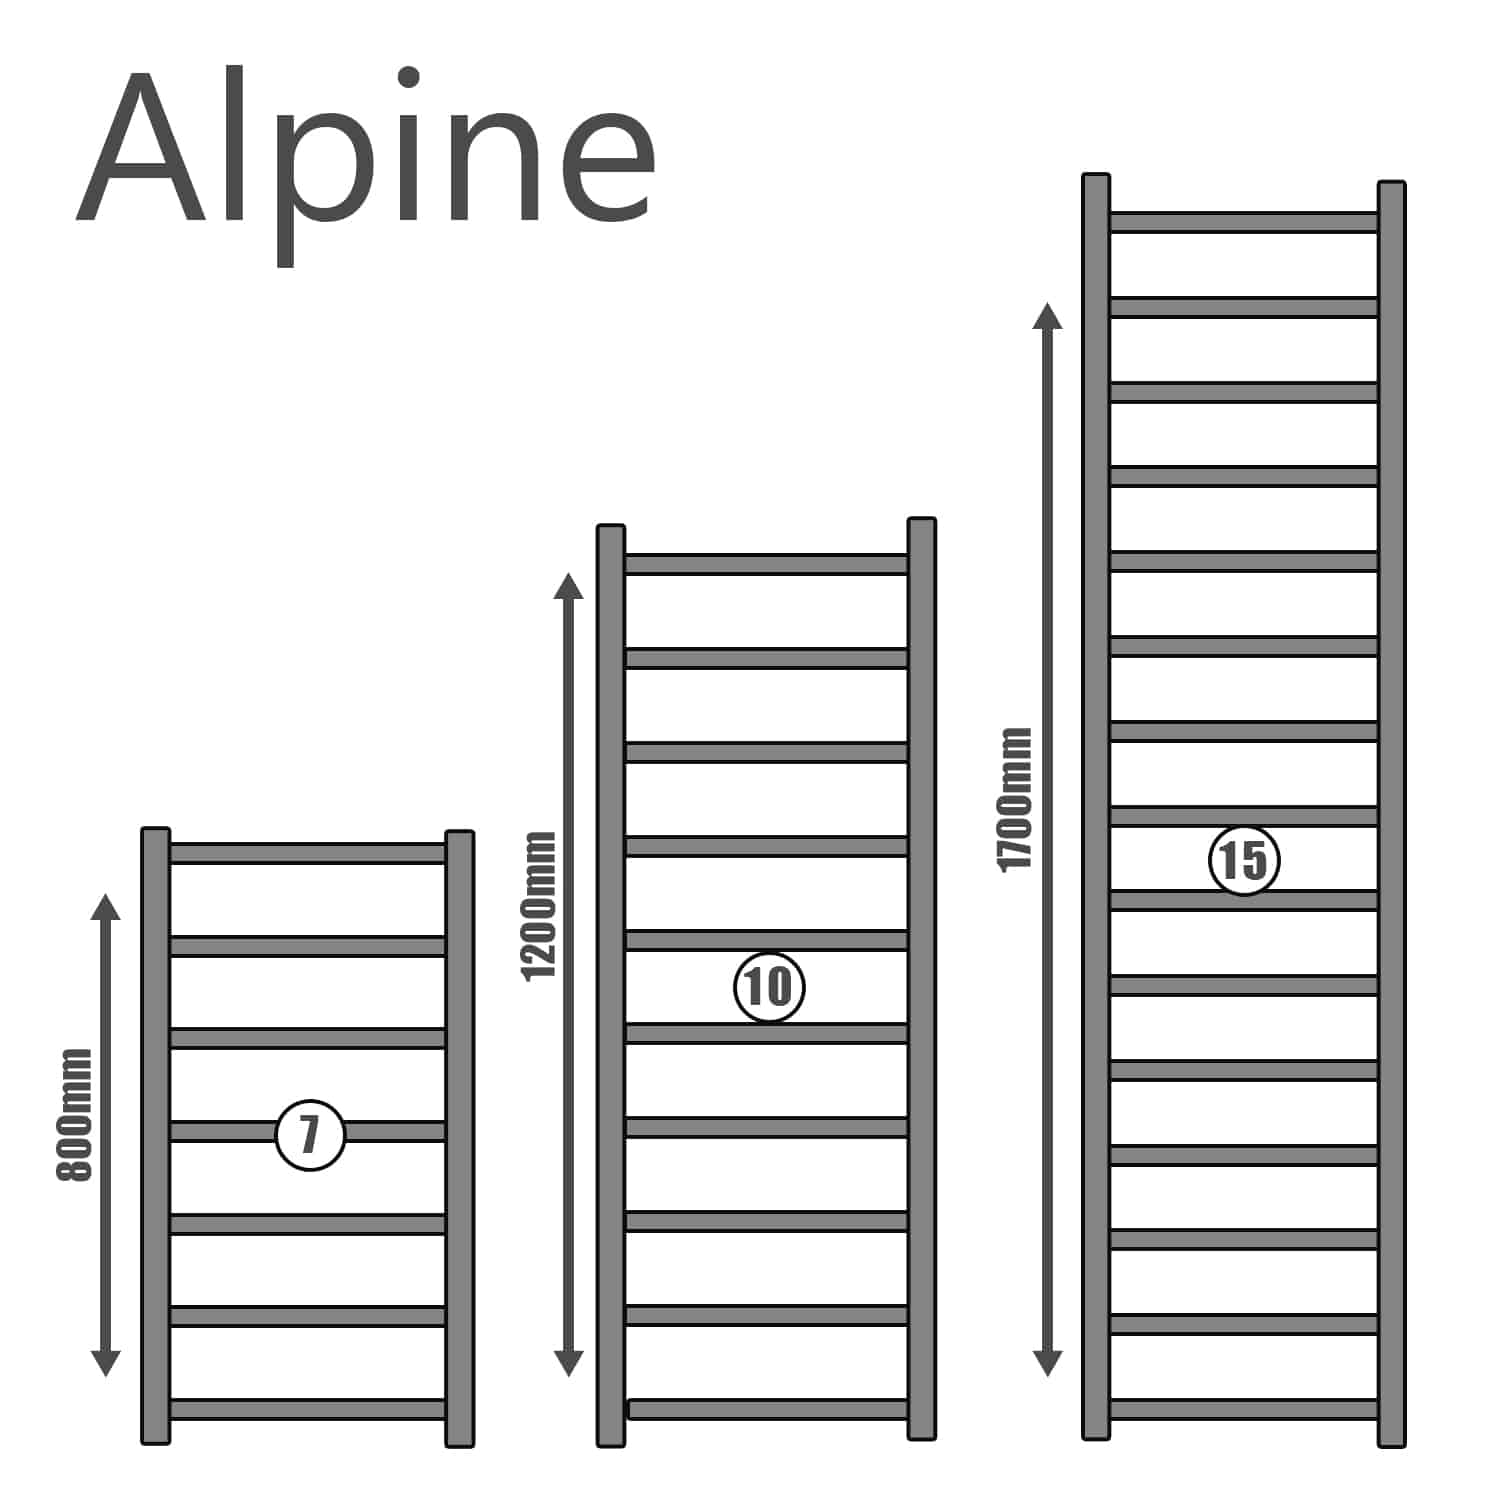 Alpine Chrome | Smart Electric Towel Rail with Thermostat, Timer + WiFi Control Best Quality & Price, Energy Saving / Economic To Run Buy Online From Adax SolAire UK Shop 17